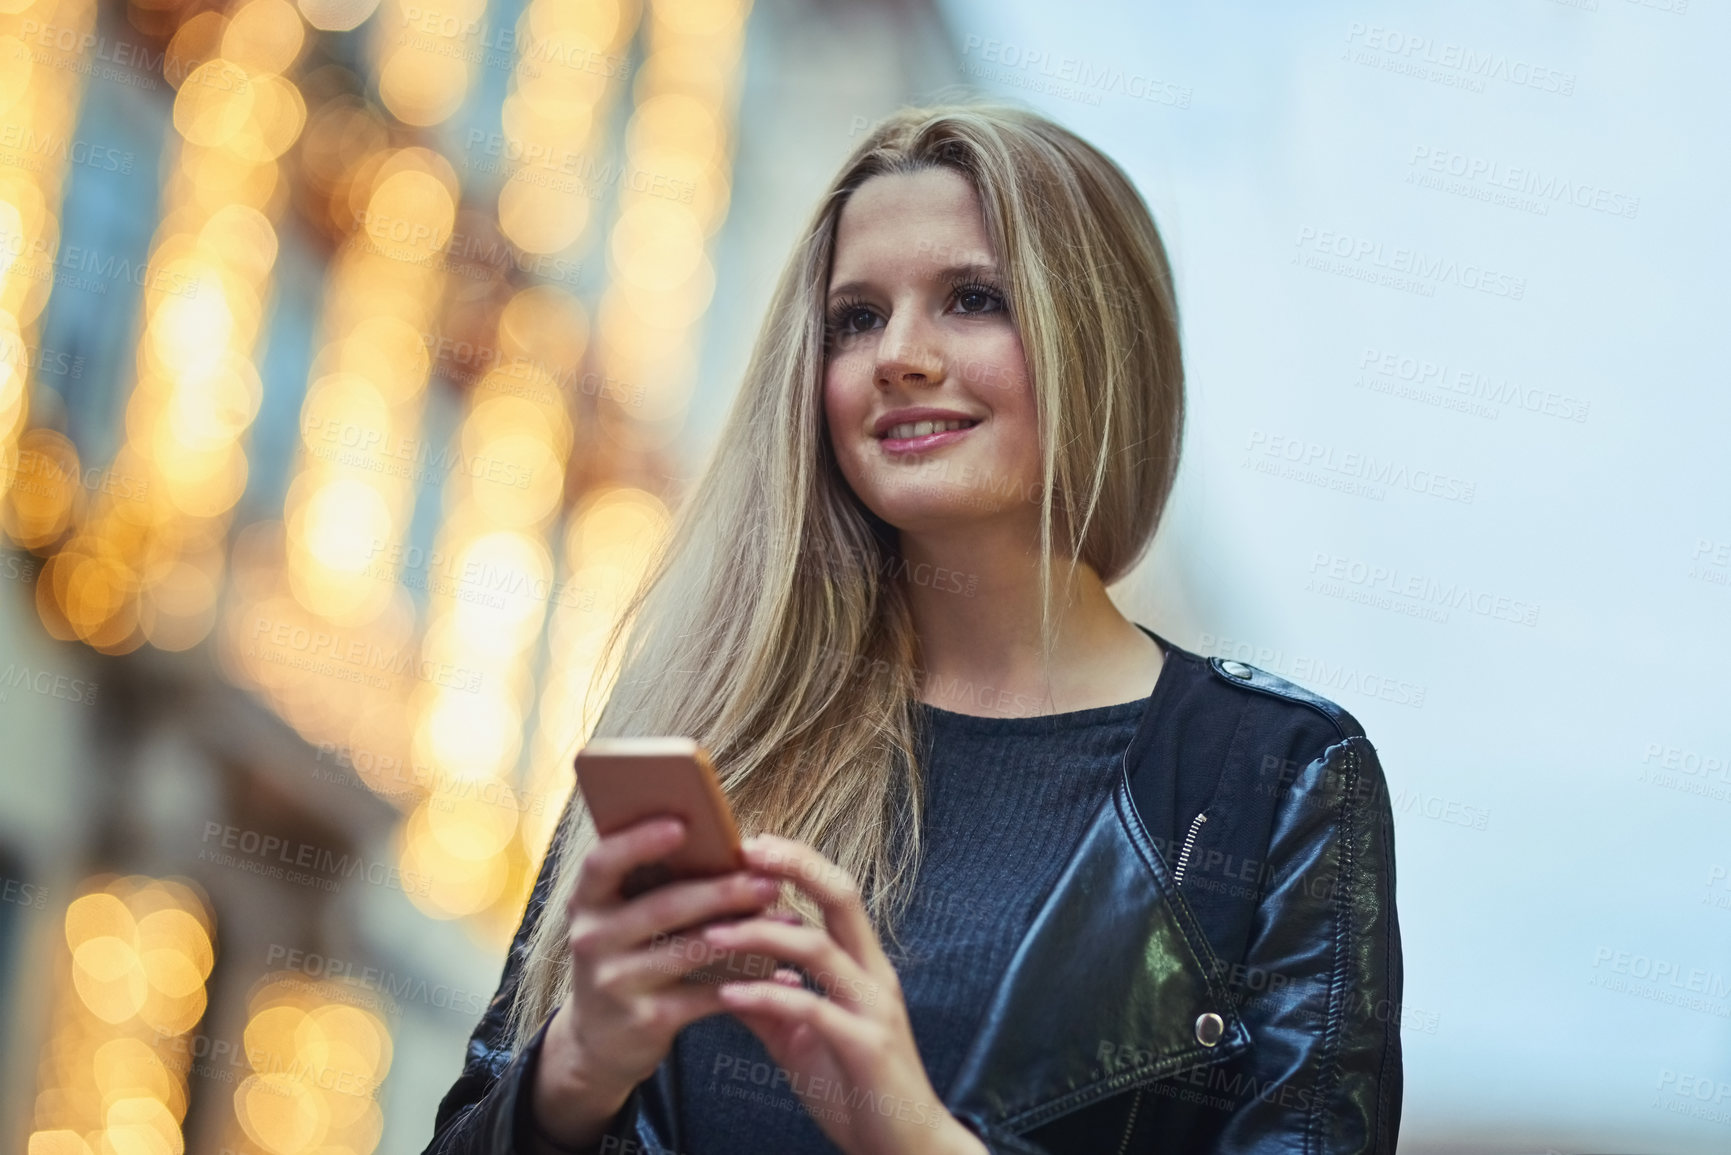 Buy stock photo Shot of an attractive woman using a mobile phone in the city